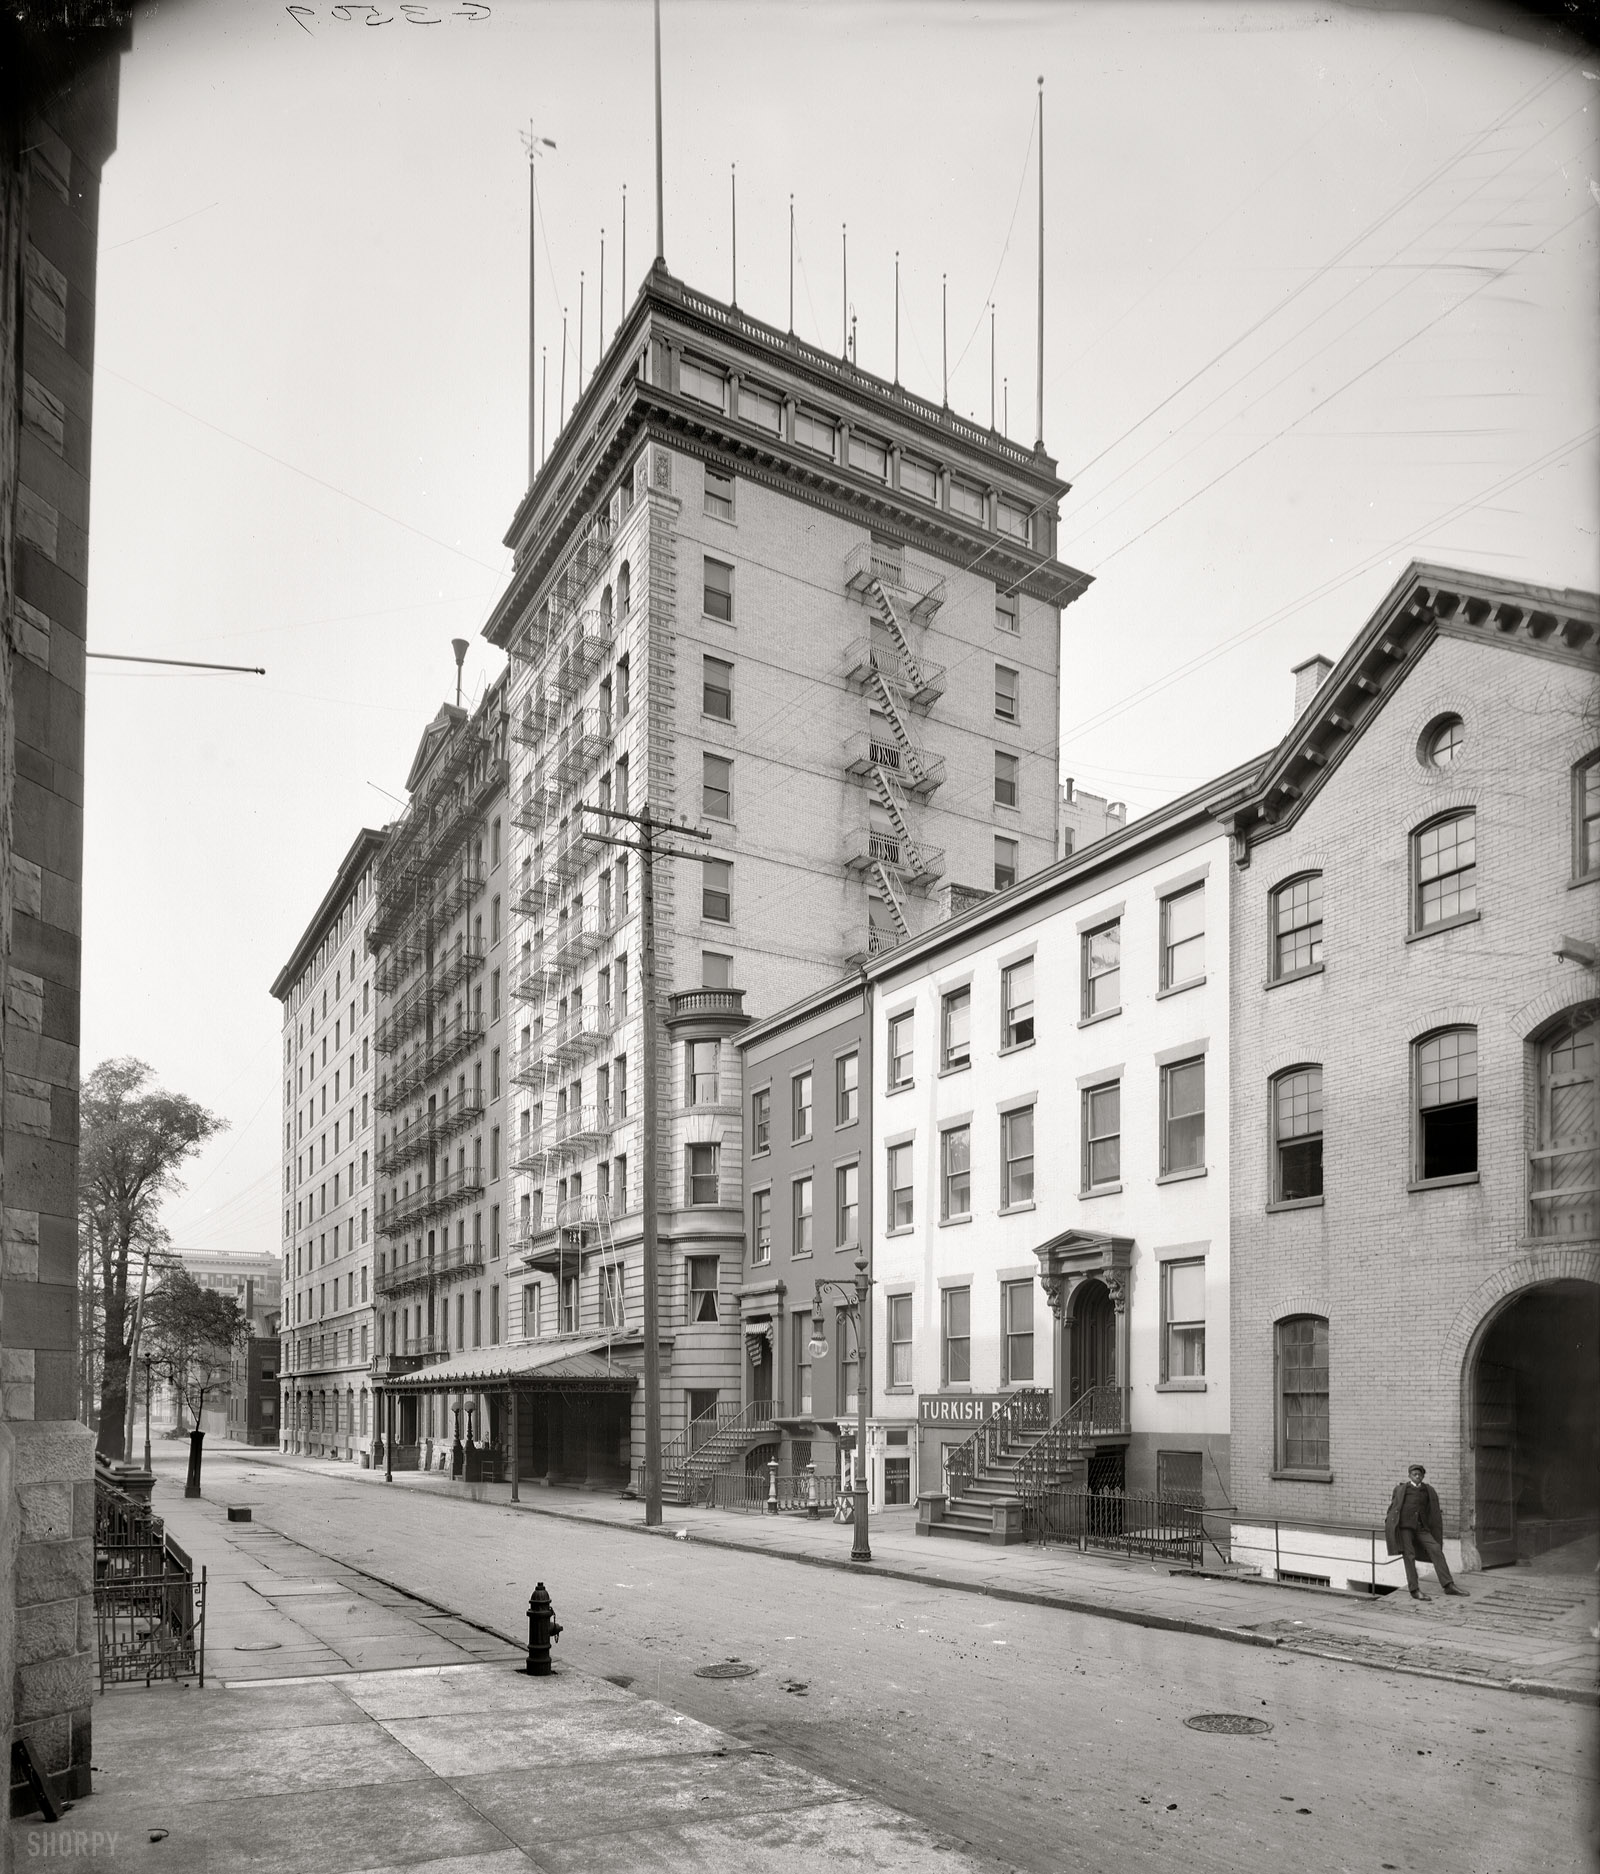 "Hotel St. George, Brooklyn, circa 1905." Plus a ghost or two in this time exposure of the hotel's Clark Street facades. This Brooklyn Heights landmark, which by the 1930s was New York's largest hotel, with 2,632 rooms in a complex of buildings spread over a block, started with the 10-story dark brick structure, completed in 1885. After more than a century, it was destroyed by fire in 1995. The adjoining white building with the flagpoles, designed by Montrose Morris in the 1890s, still stands. Detroit Publishing Co. glass negative. View full size.